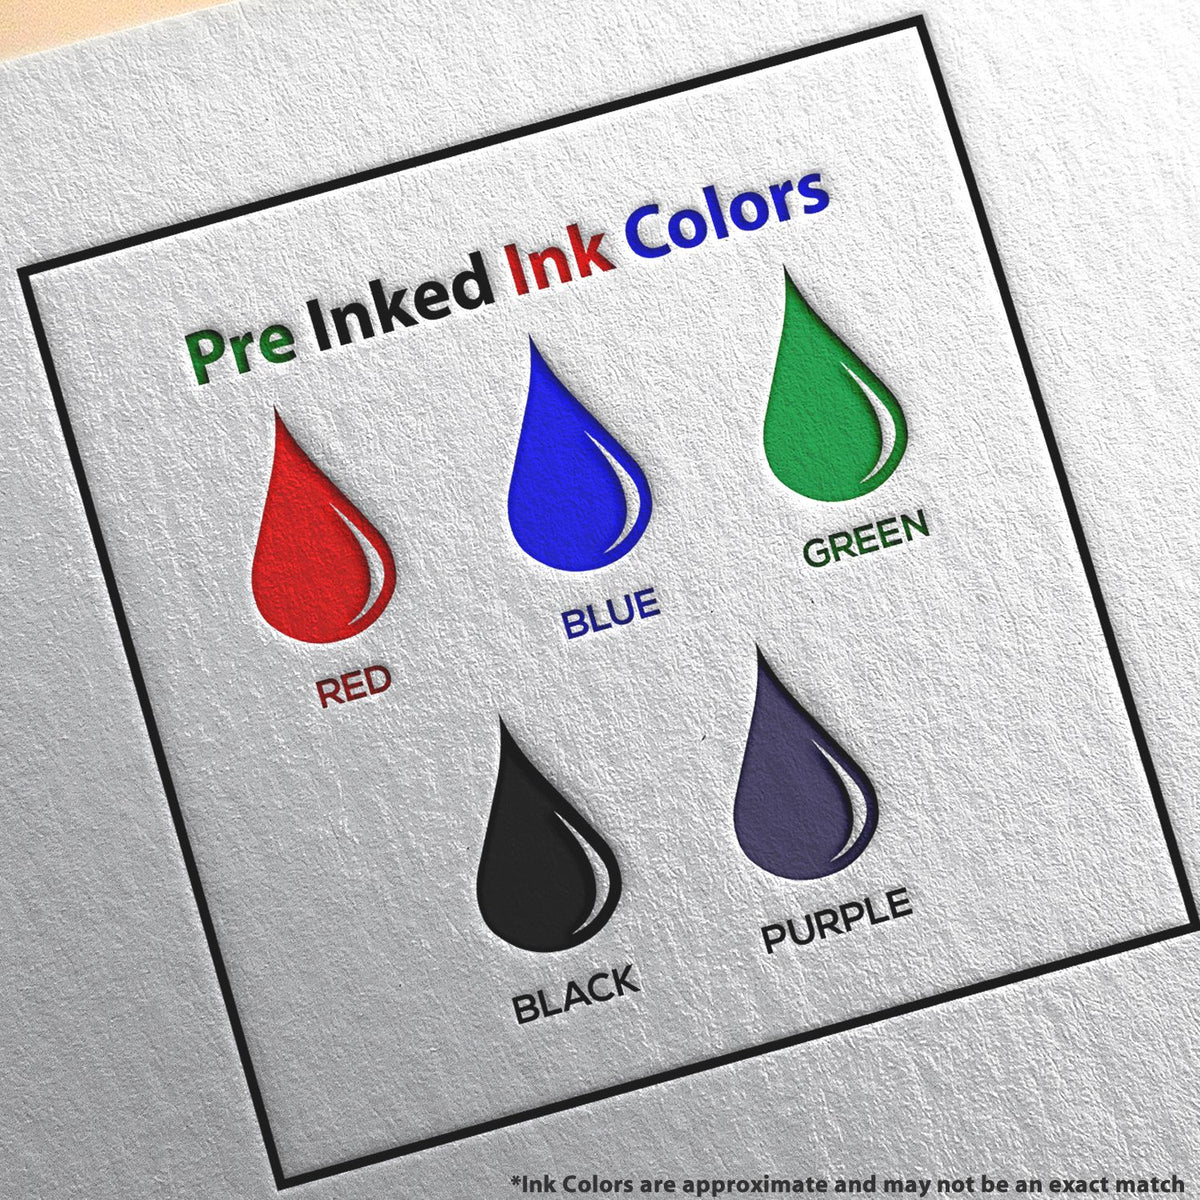 A picture showing the different ink colors or hues available for the Slim Pre-Inked Florida Land Surveyor Seal Stamp product.